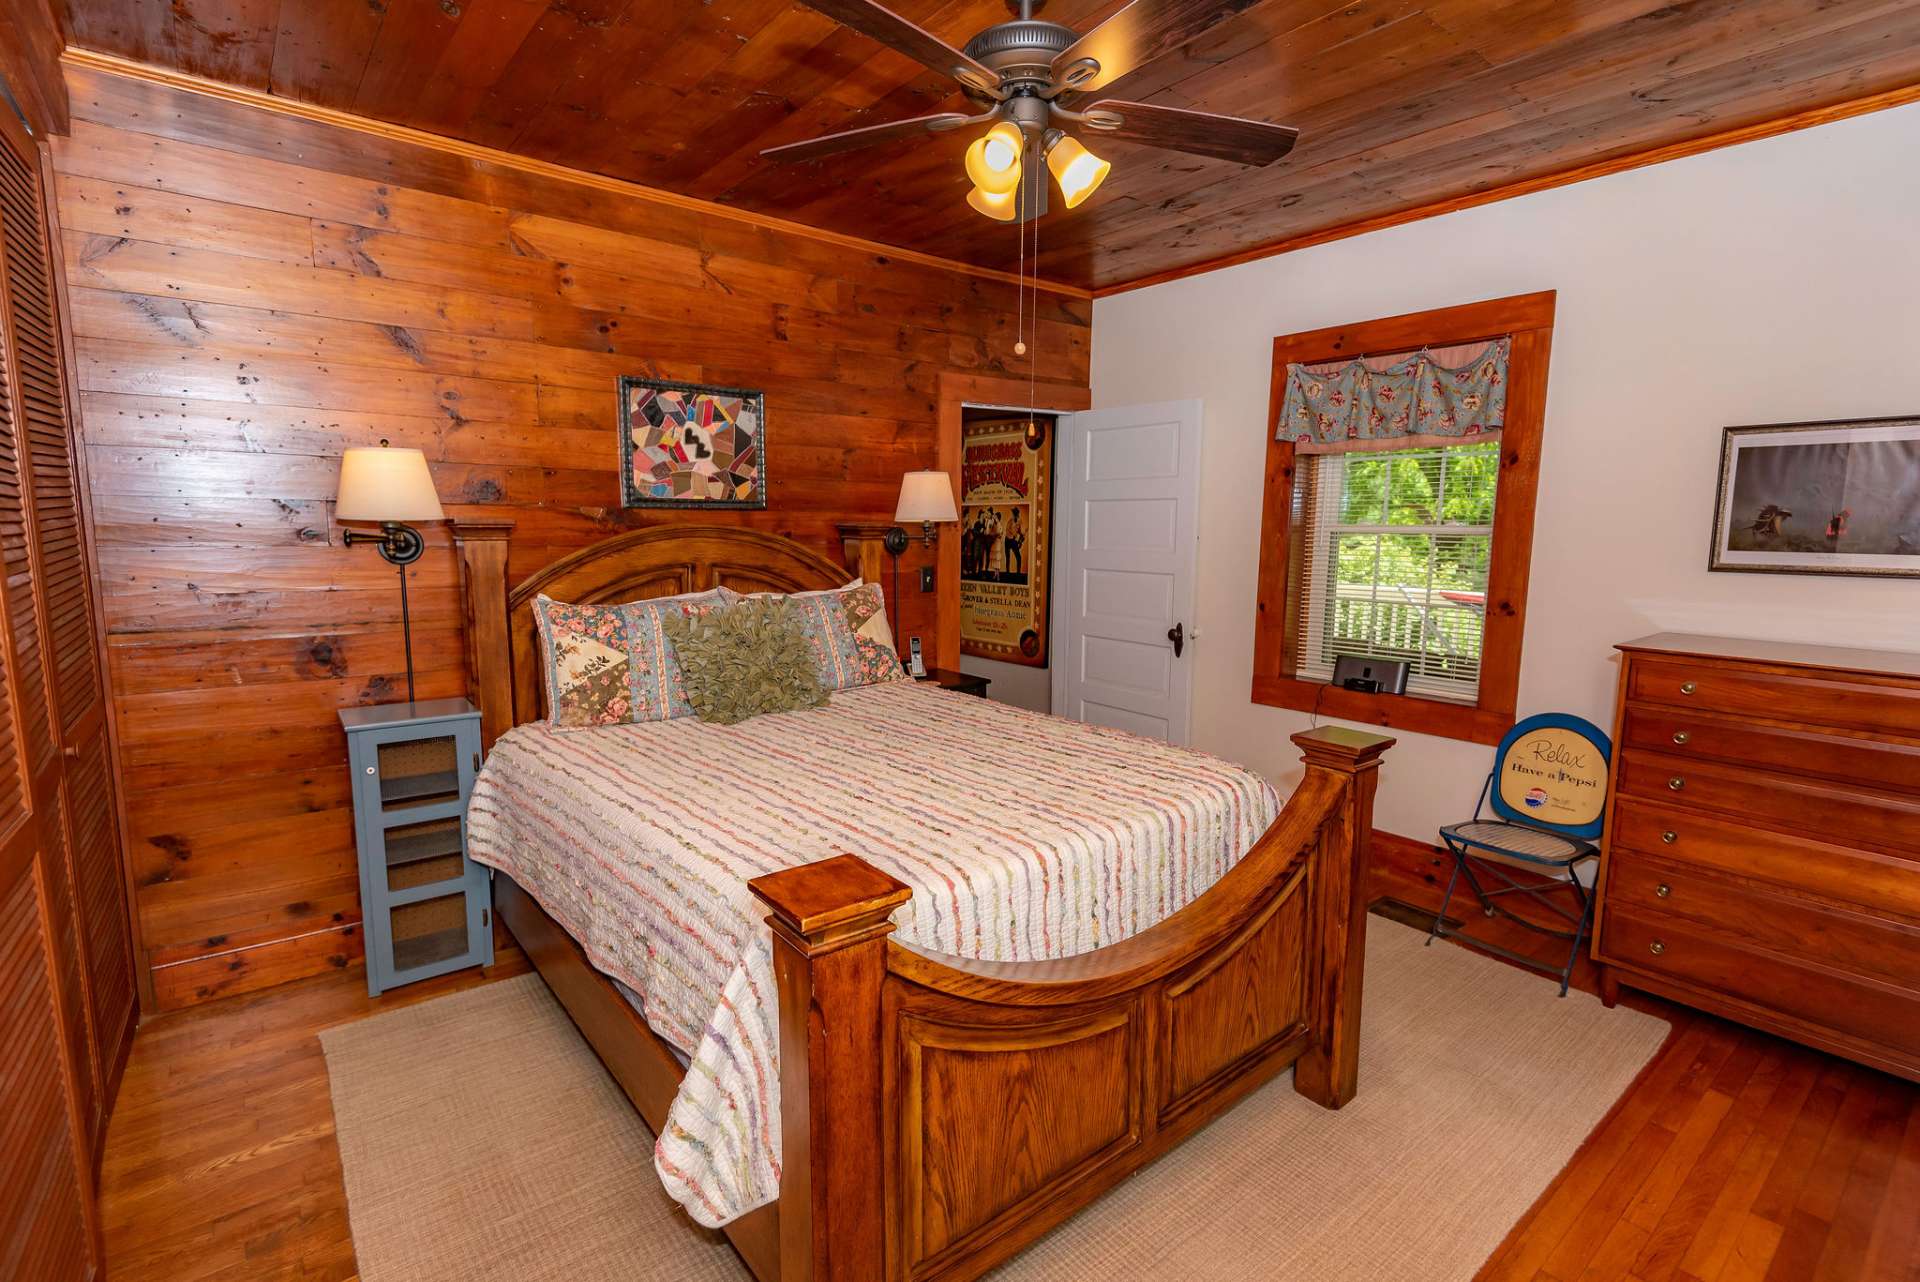 The main level master bedroom offers more original woodwork and a private bath.